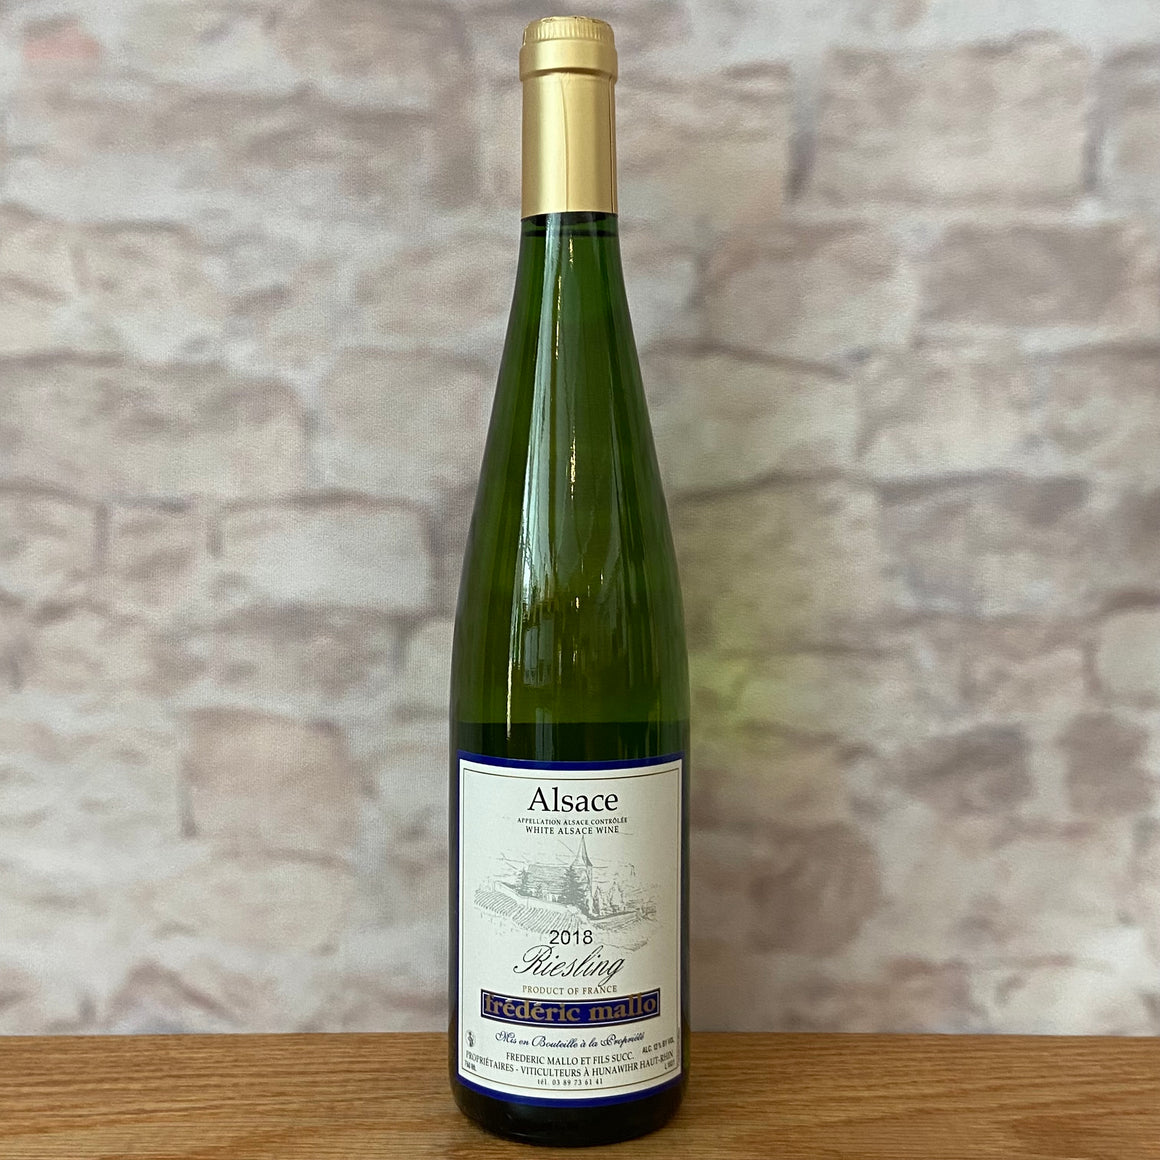 FREDERIC MALLO RIESLING ALSACE 2018